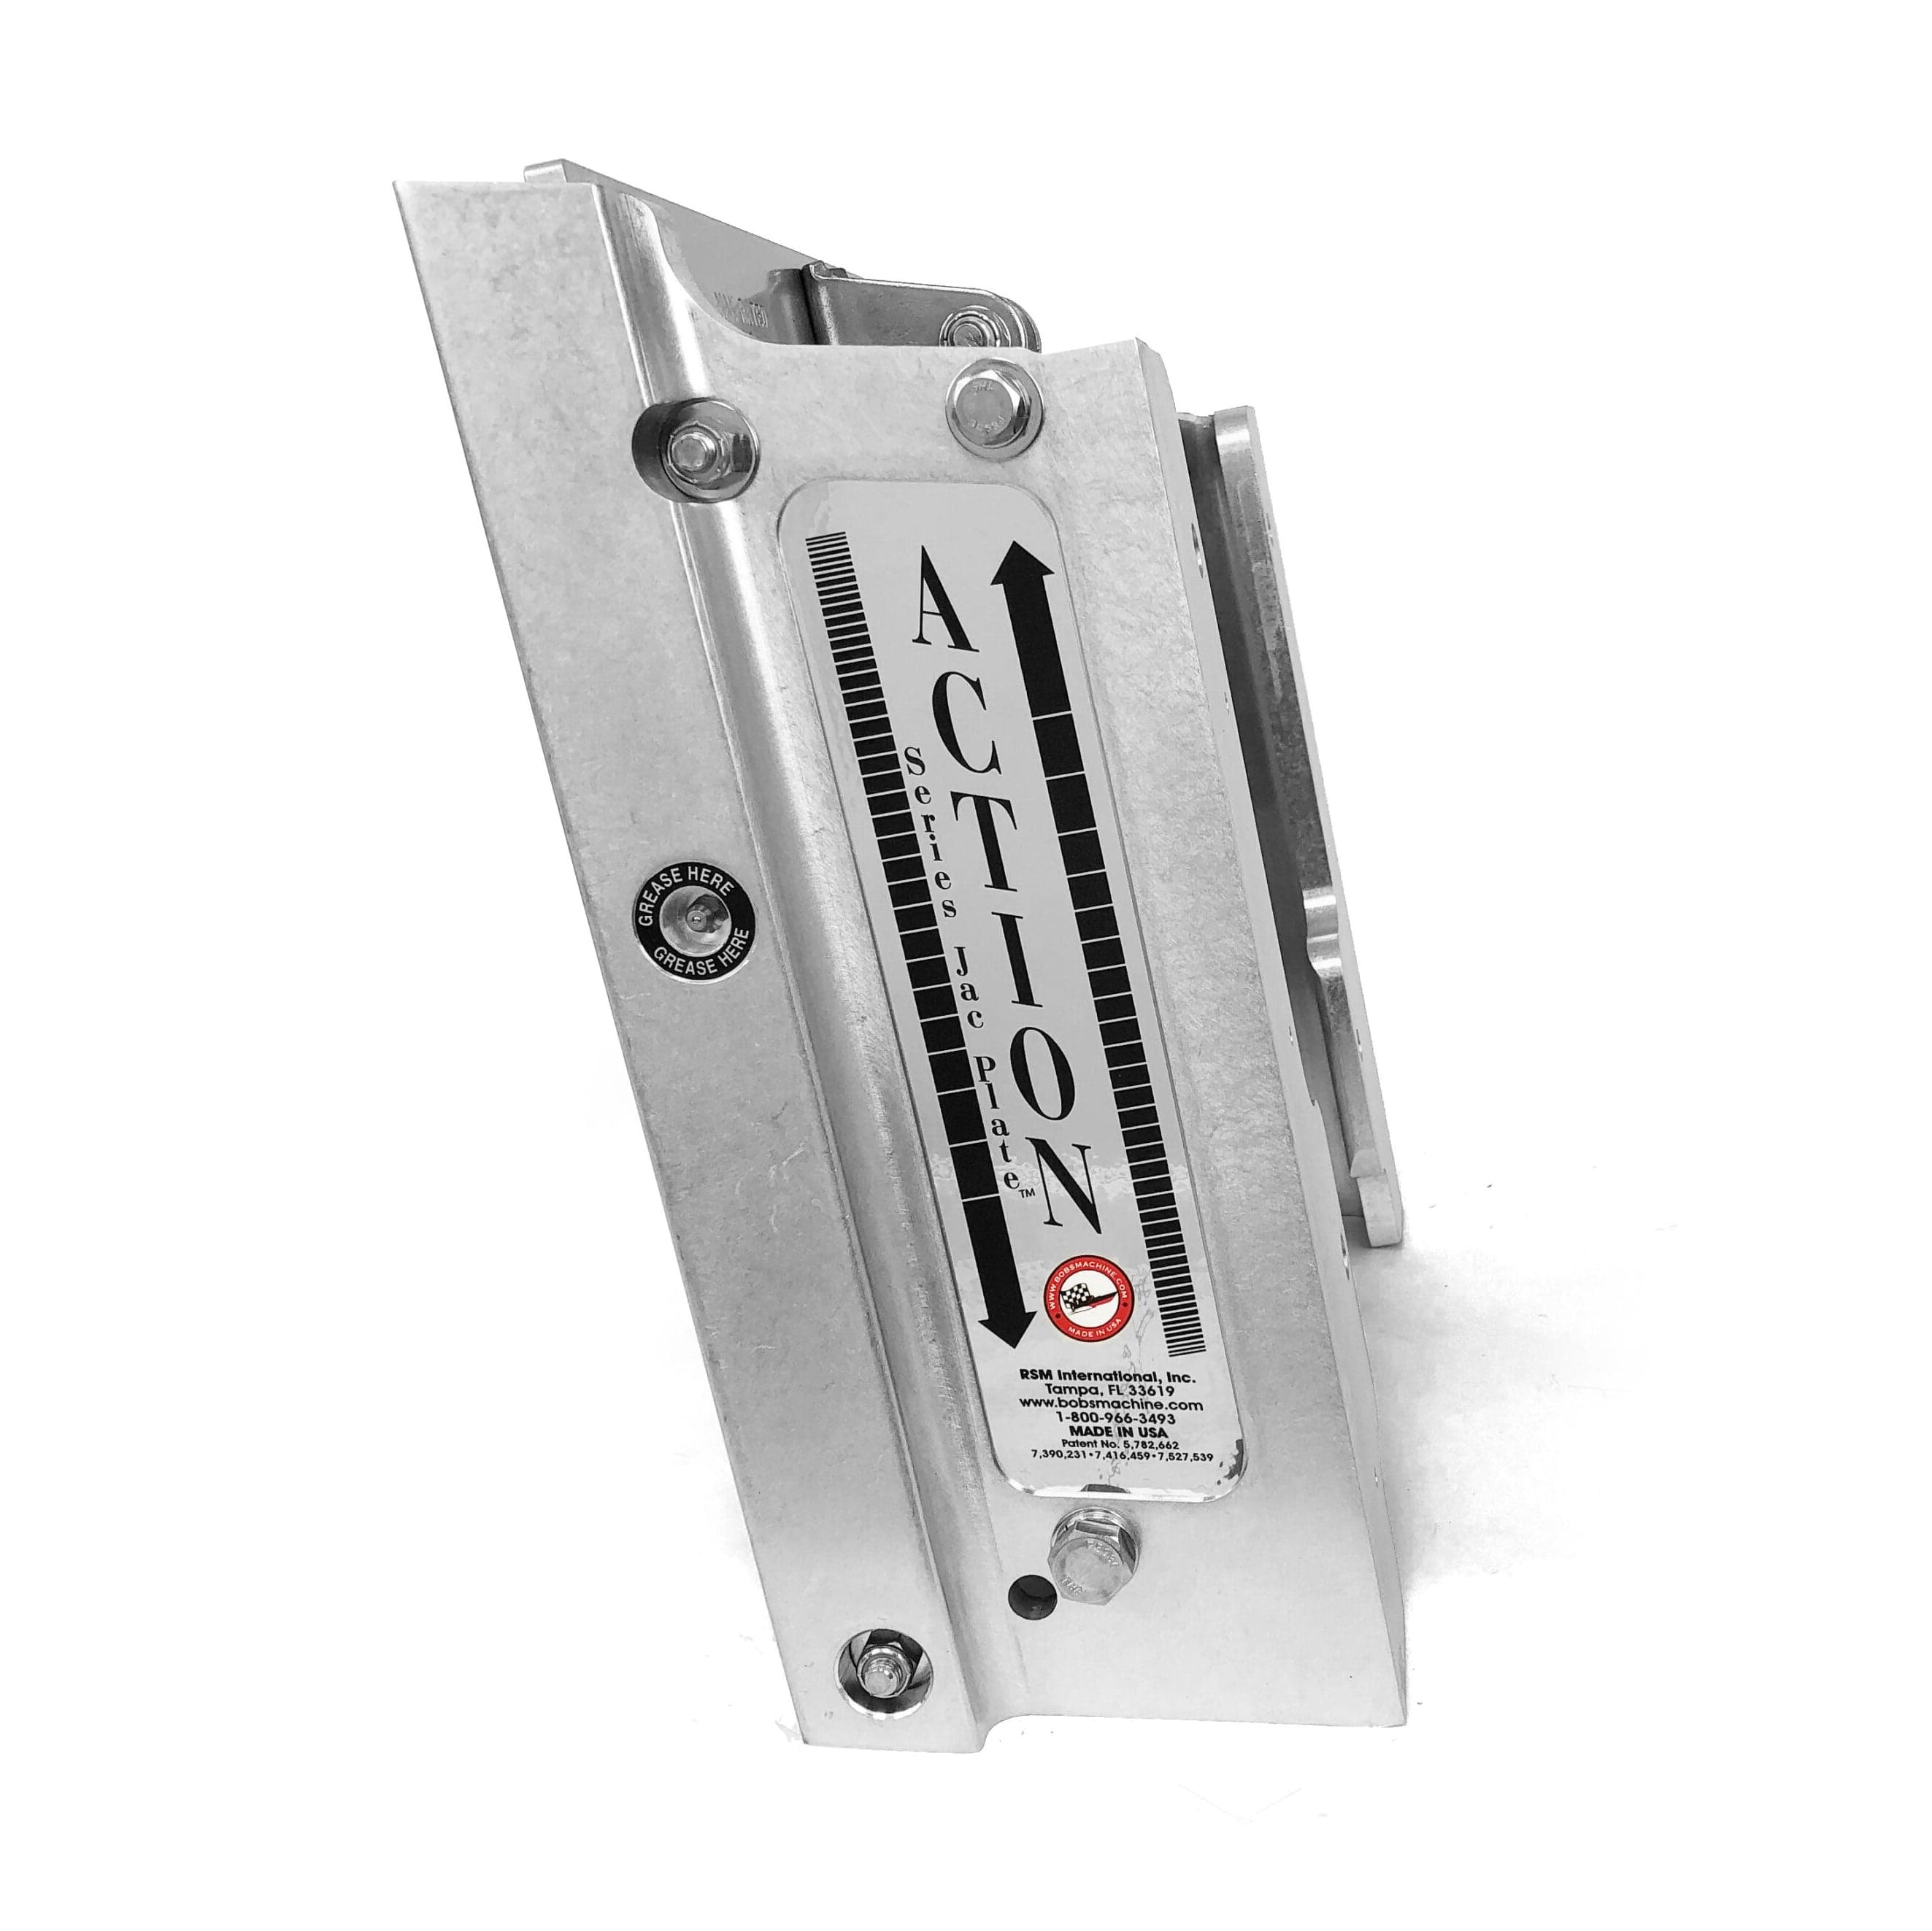 Bob's Machine 6" Setback Action Jackplate - Up to 300HP